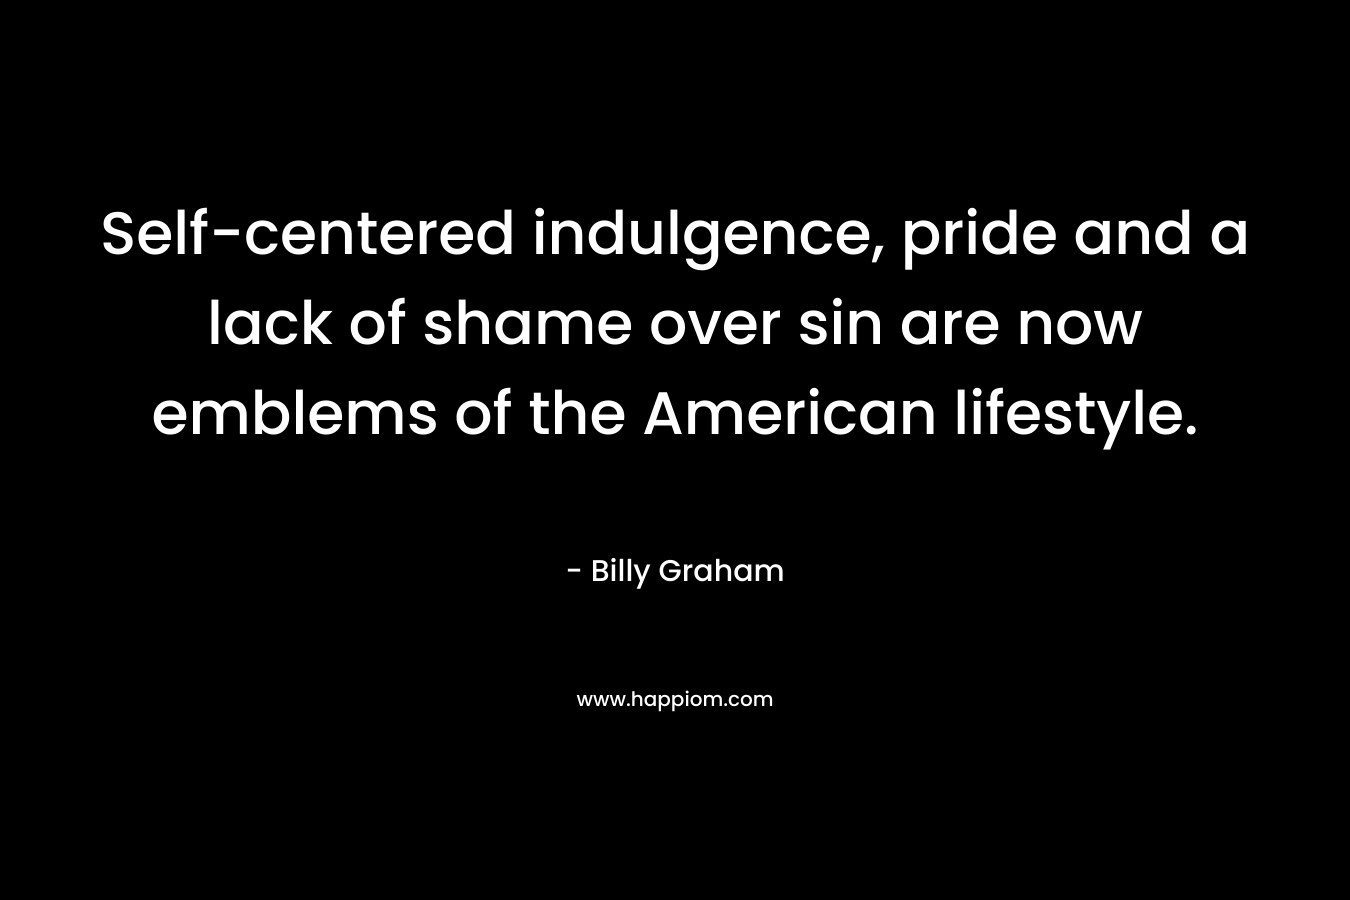 Self-centered indulgence, pride and a lack of shame over sin are now emblems of the American lifestyle. – Billy Graham